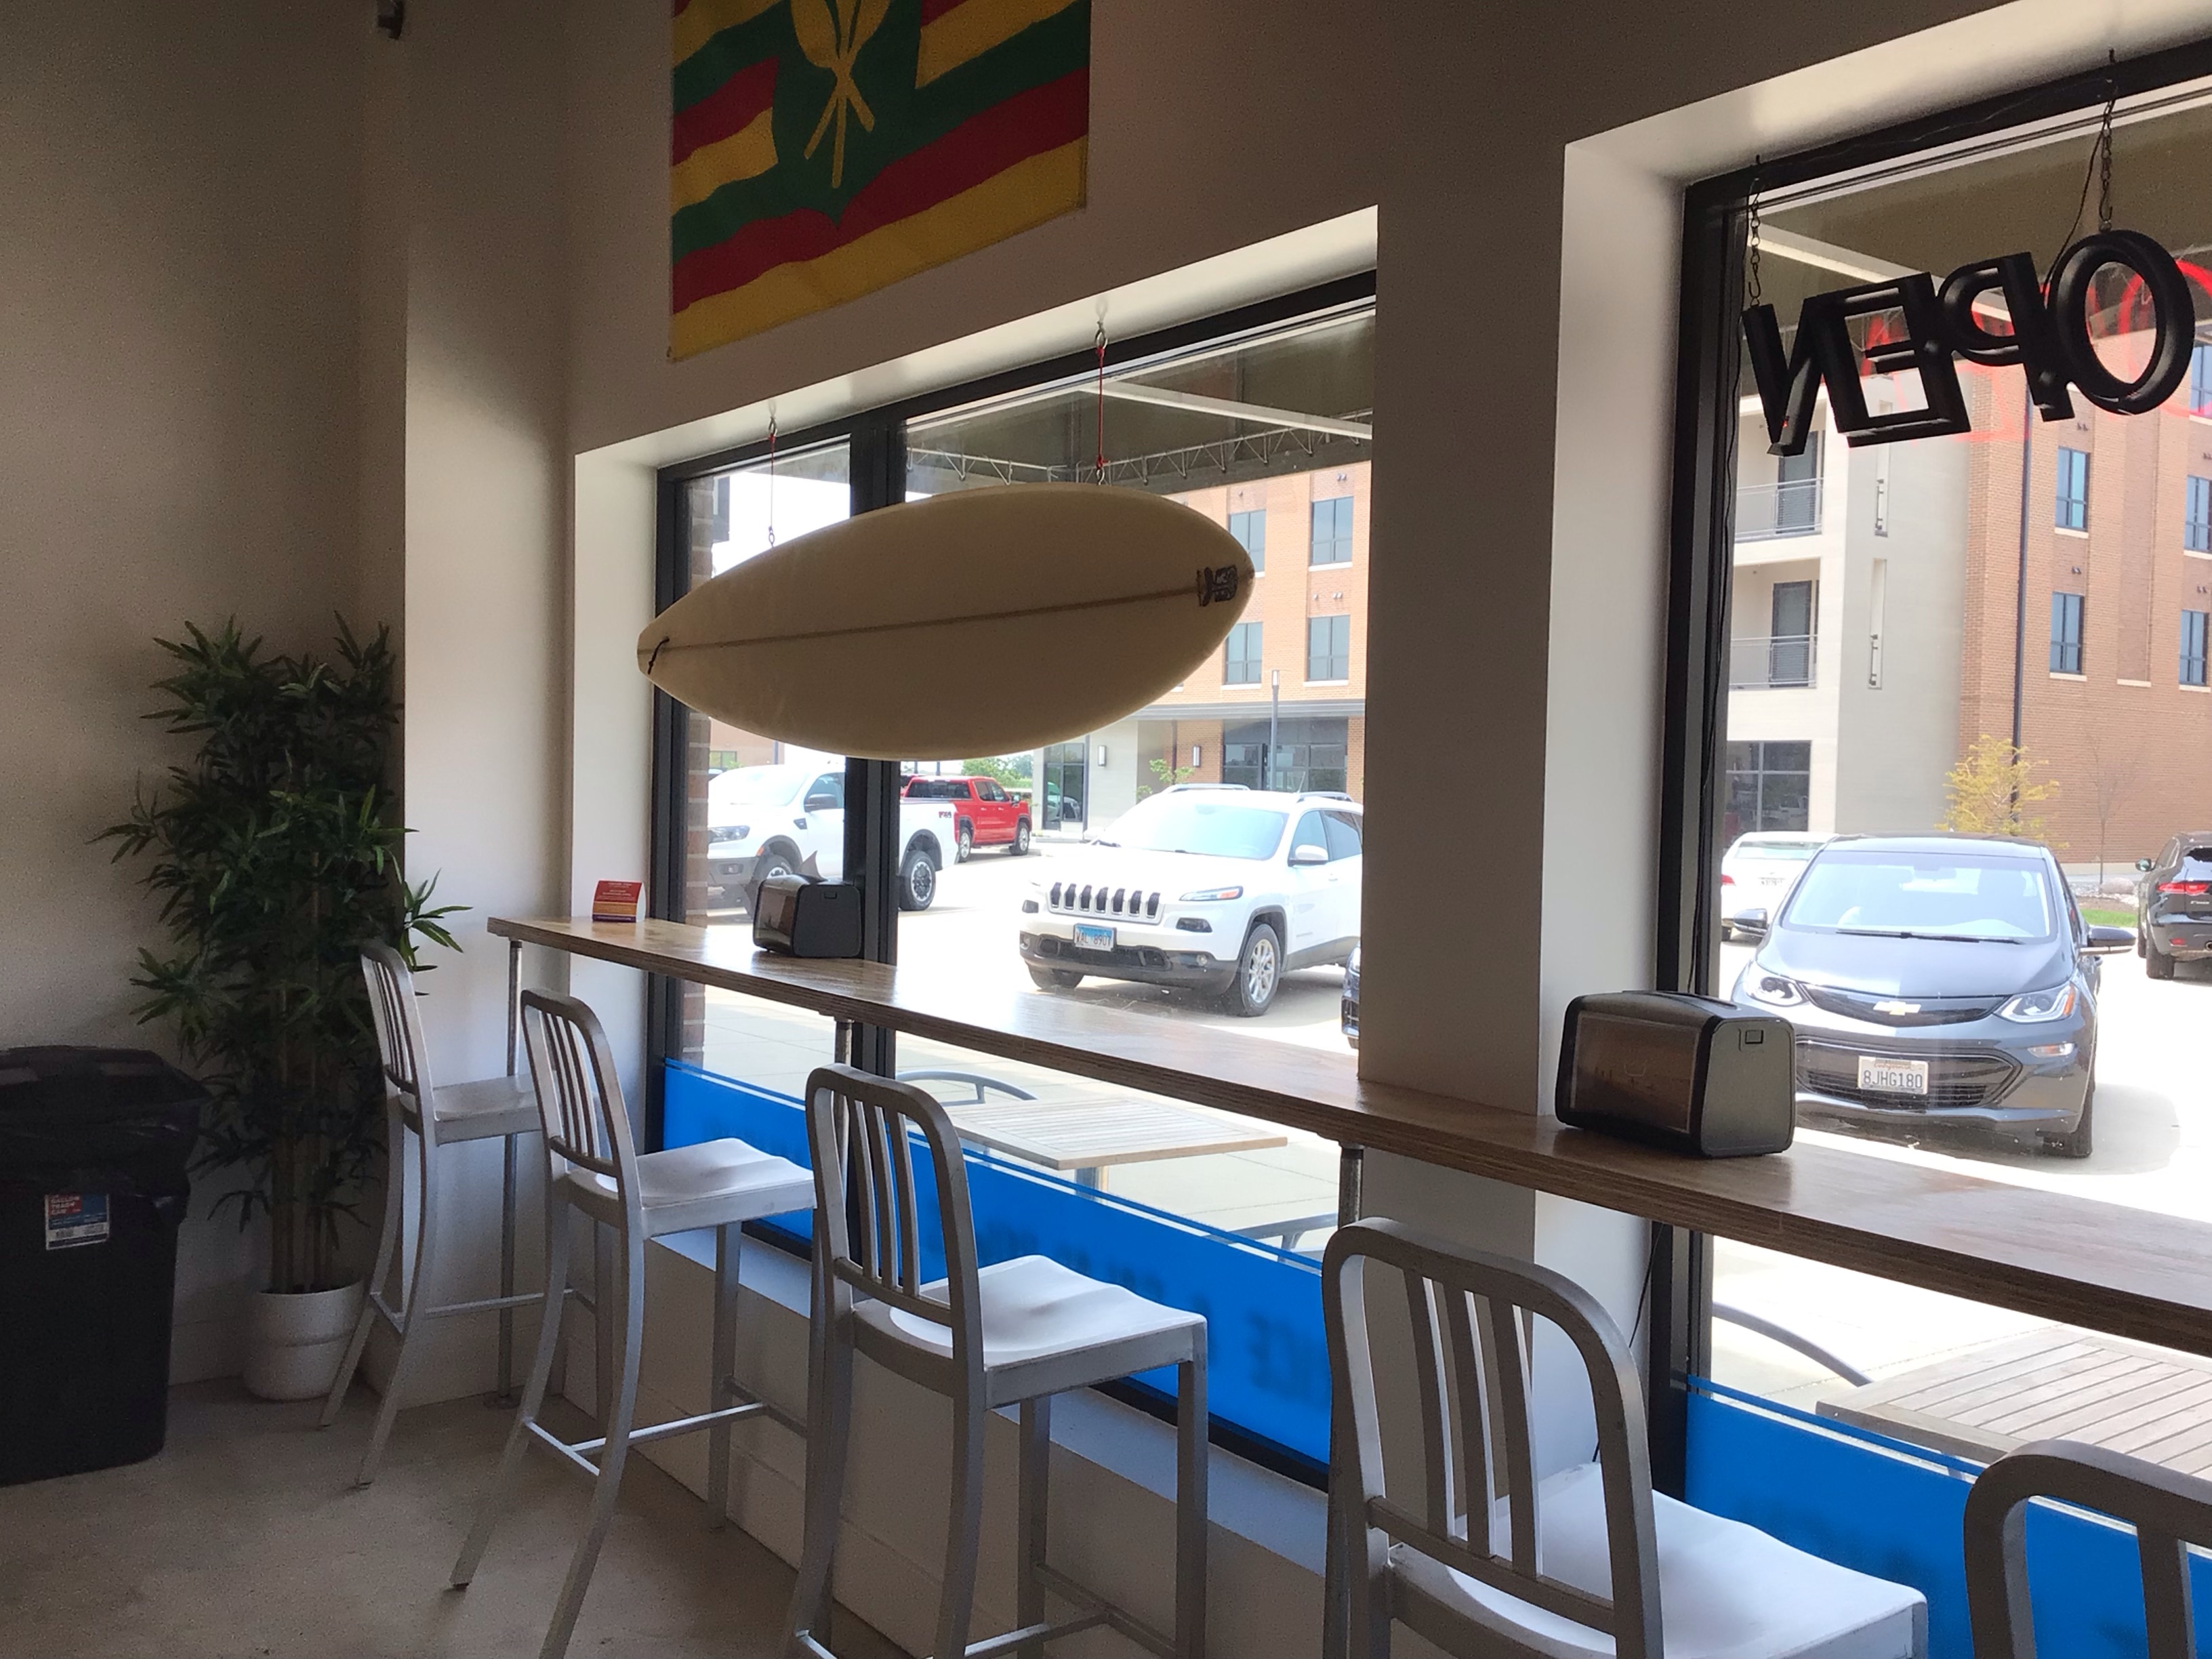 A view of Poke Shackâ€™s dine-in area shows a single, slim counter set up against the front windows of the restaurant. Four stools with metal frames/backs are pulled up to the counter, facing out into the street. Over one side of the counter hangs a cream-colored surfboard. The red, yellow, and green kanaka maoli Hawaiian flag hangs on the wall above the surfboard. Photo by Rachael McMillan.